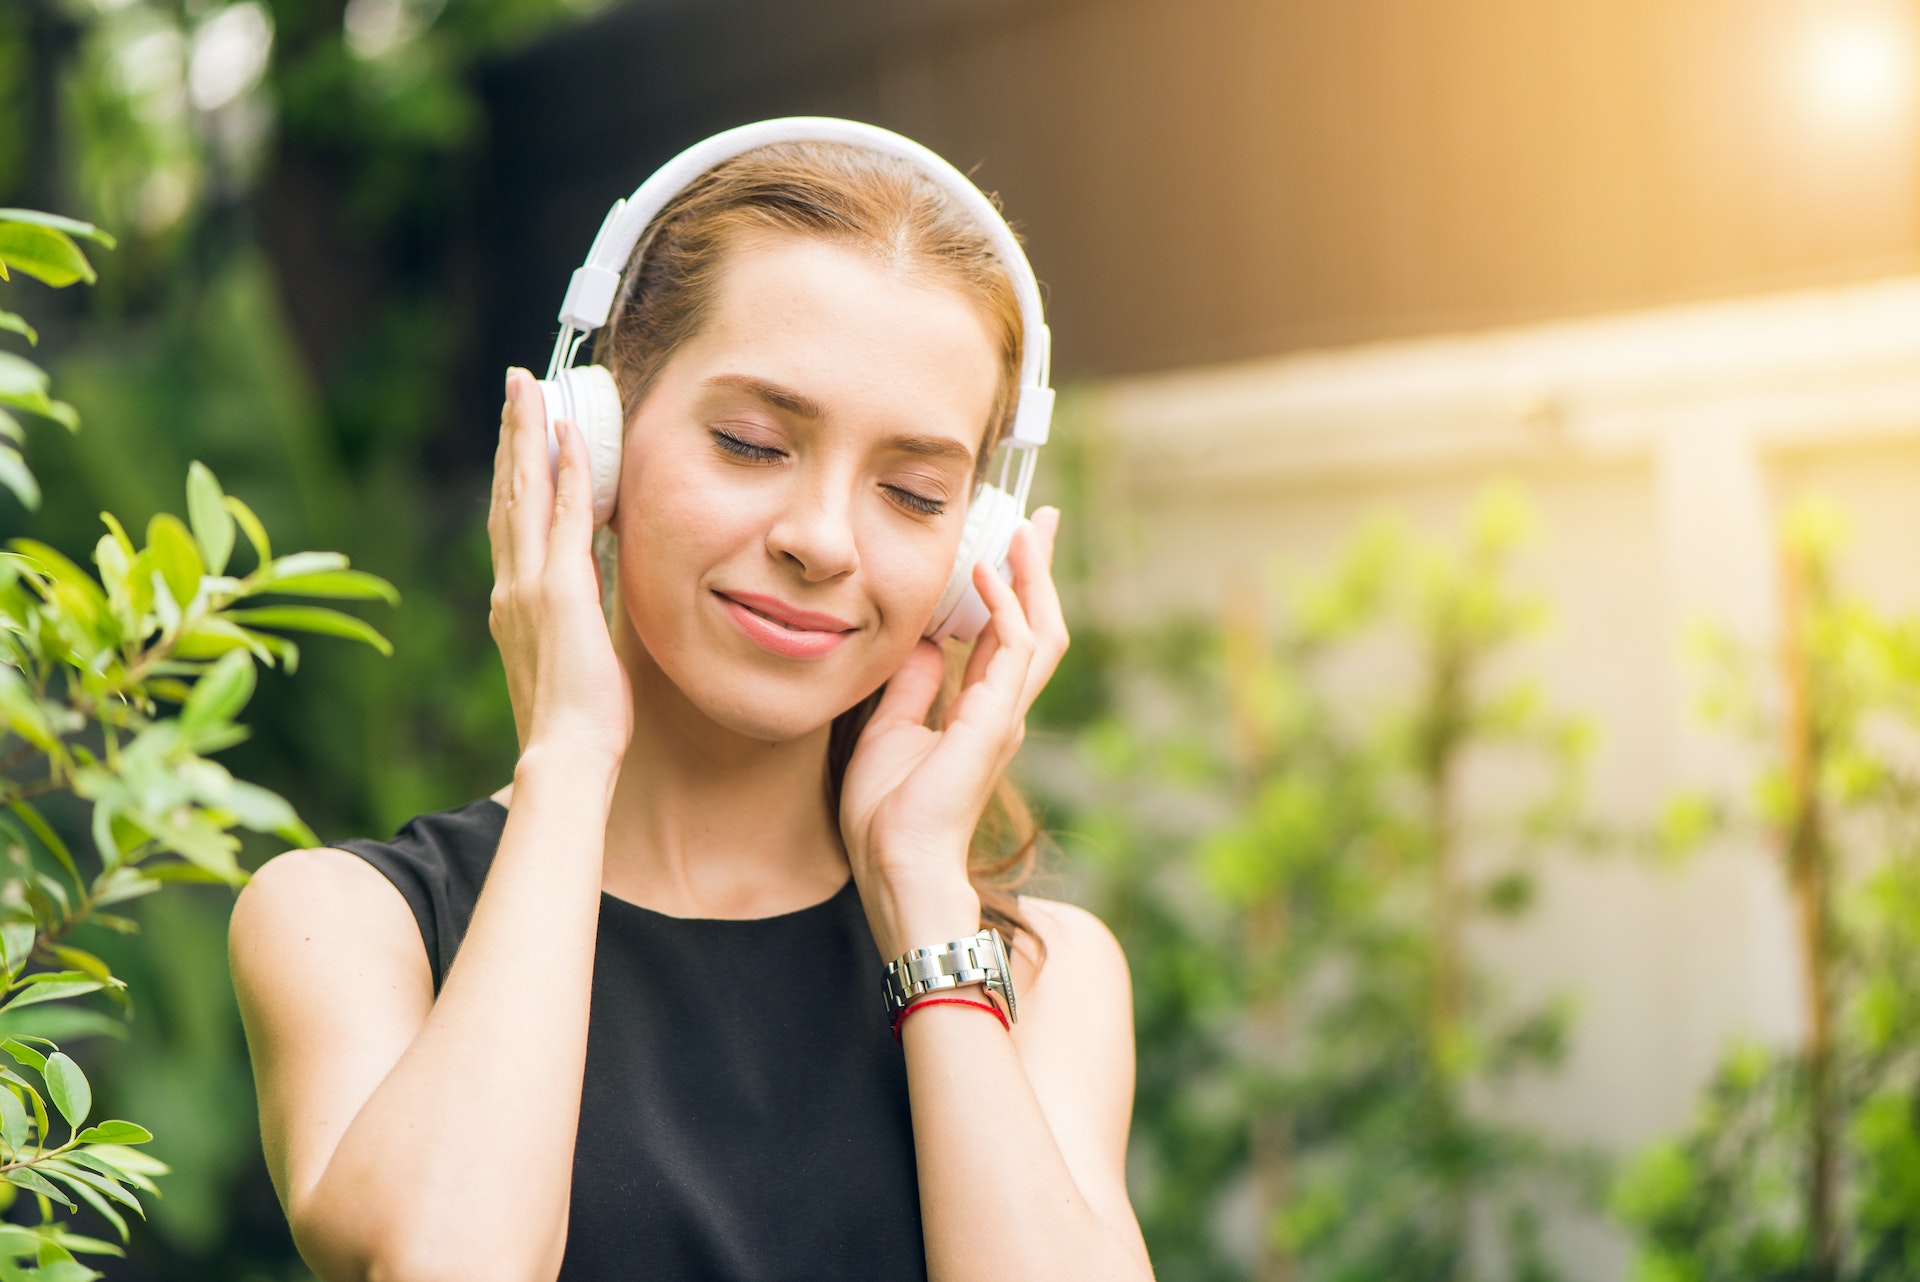 How to relax with music